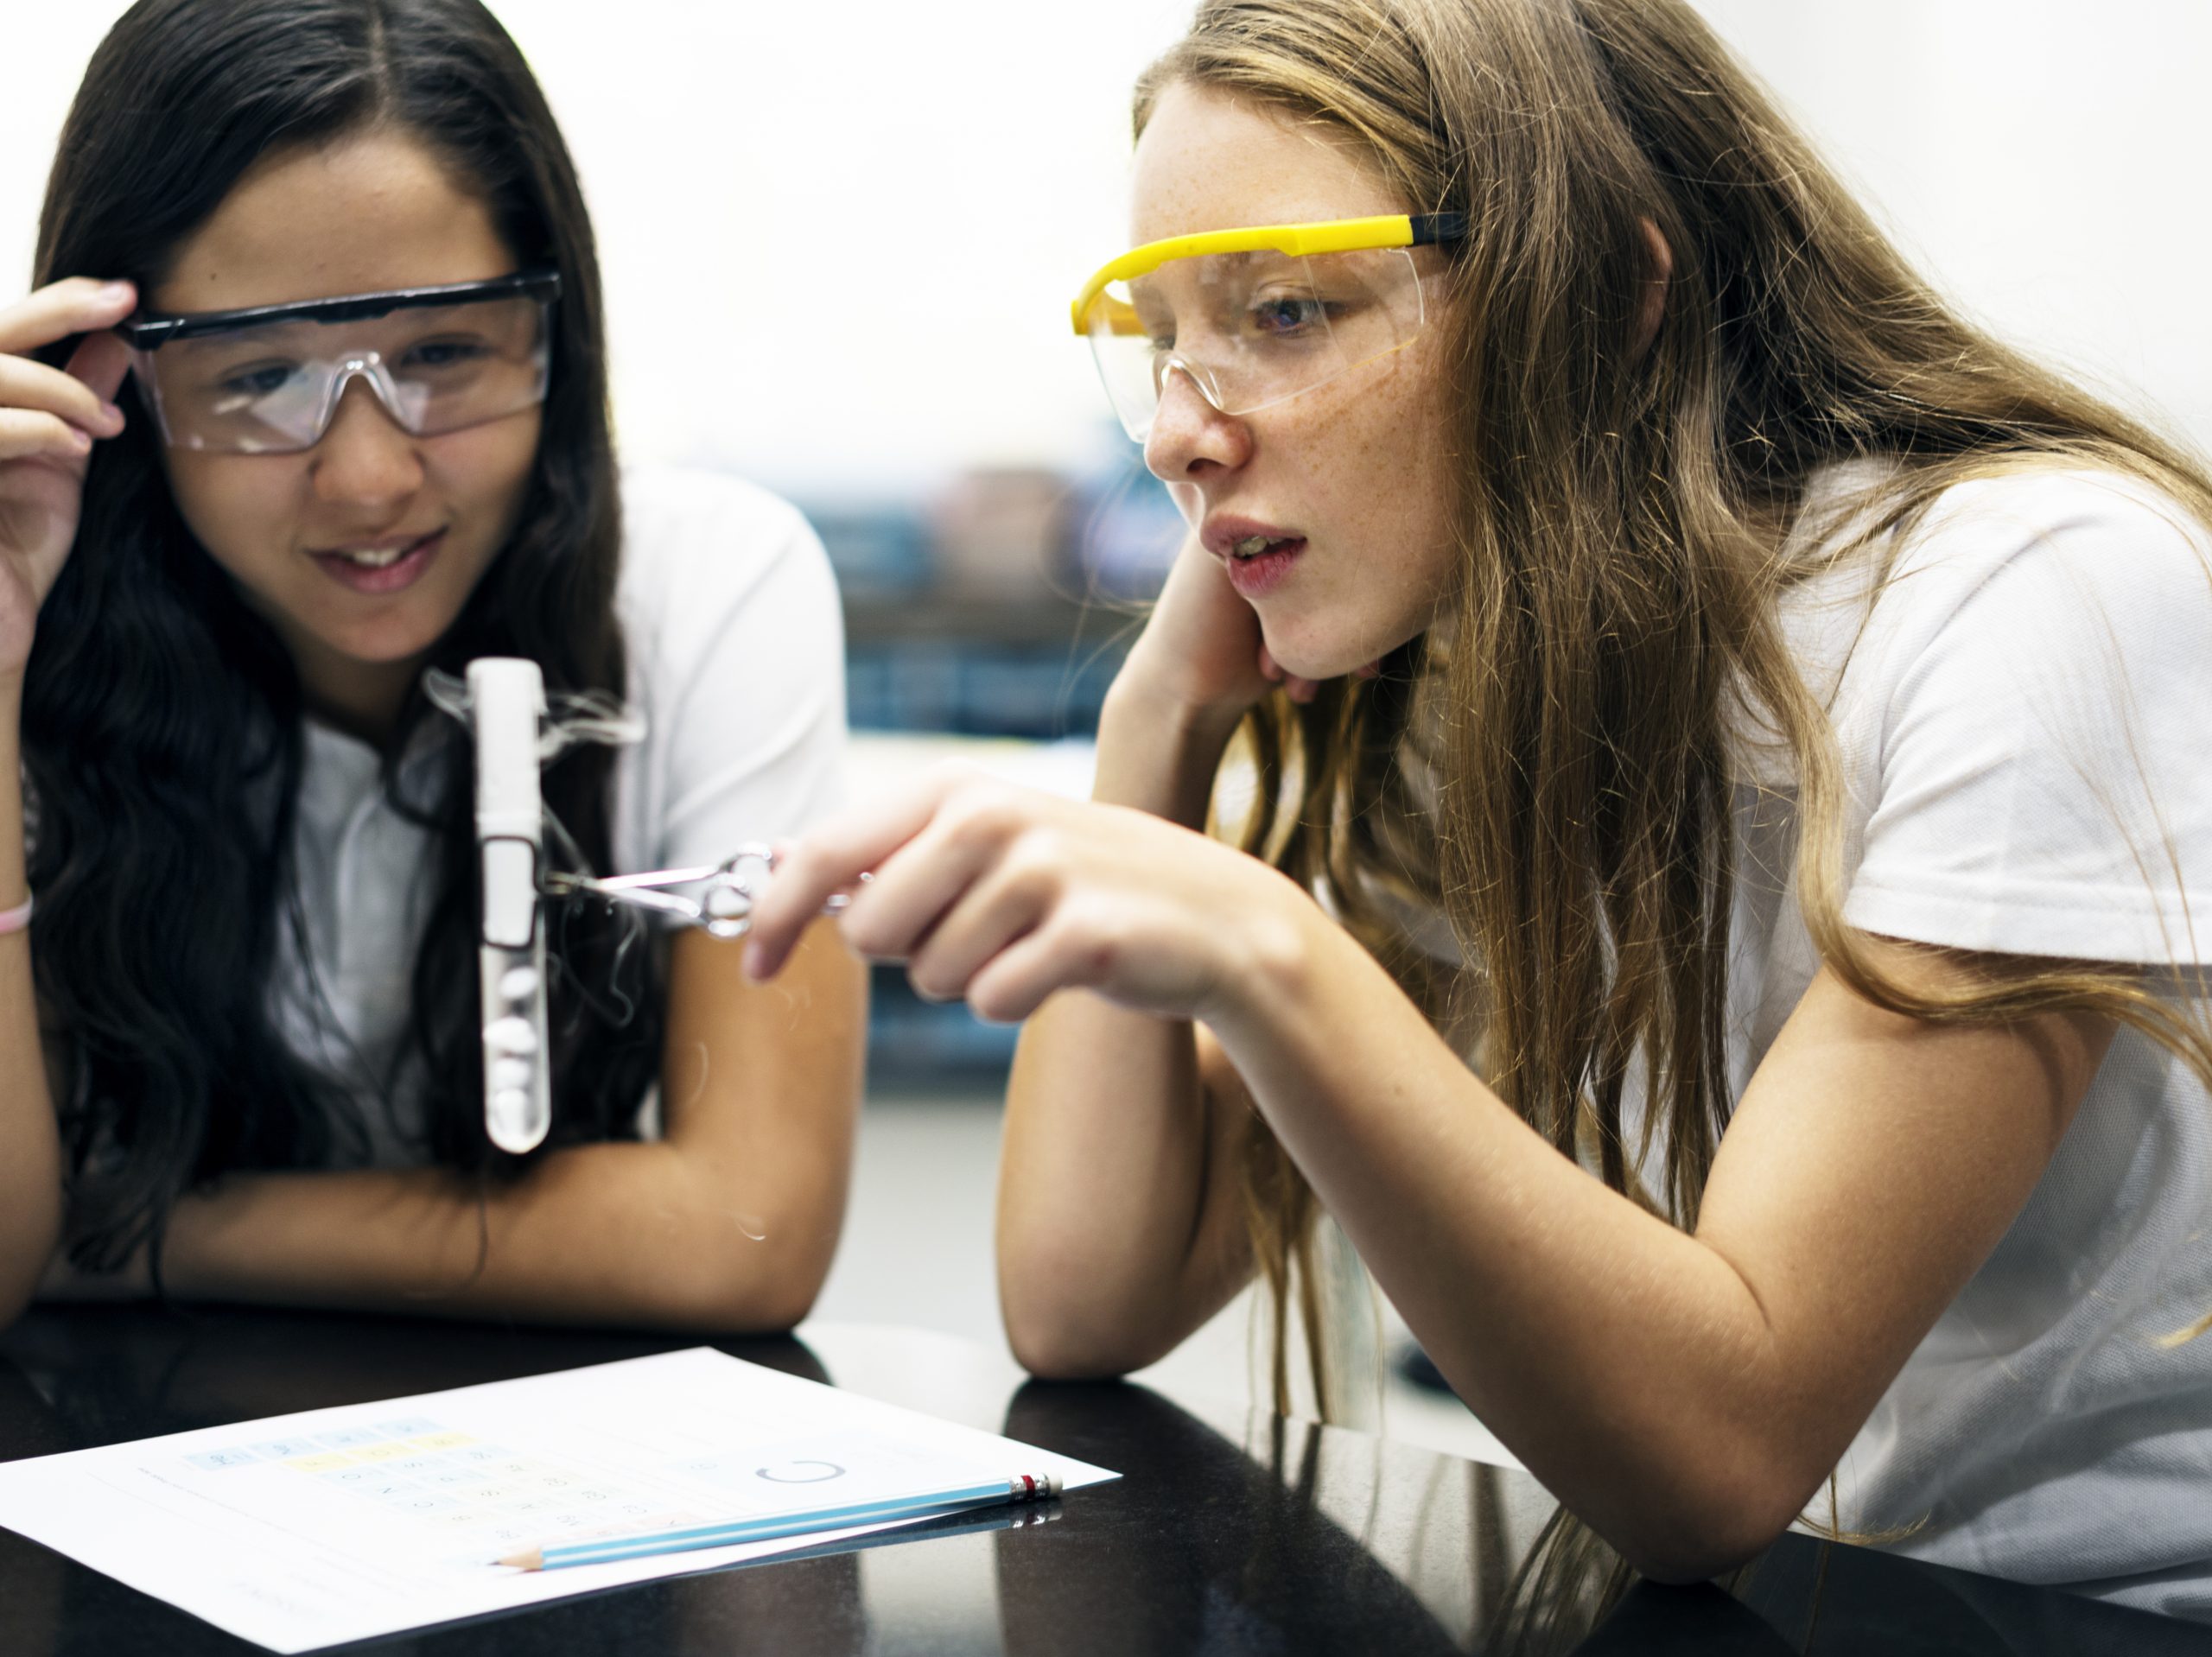 female students in science classroom wearing goggles and holding a test tube